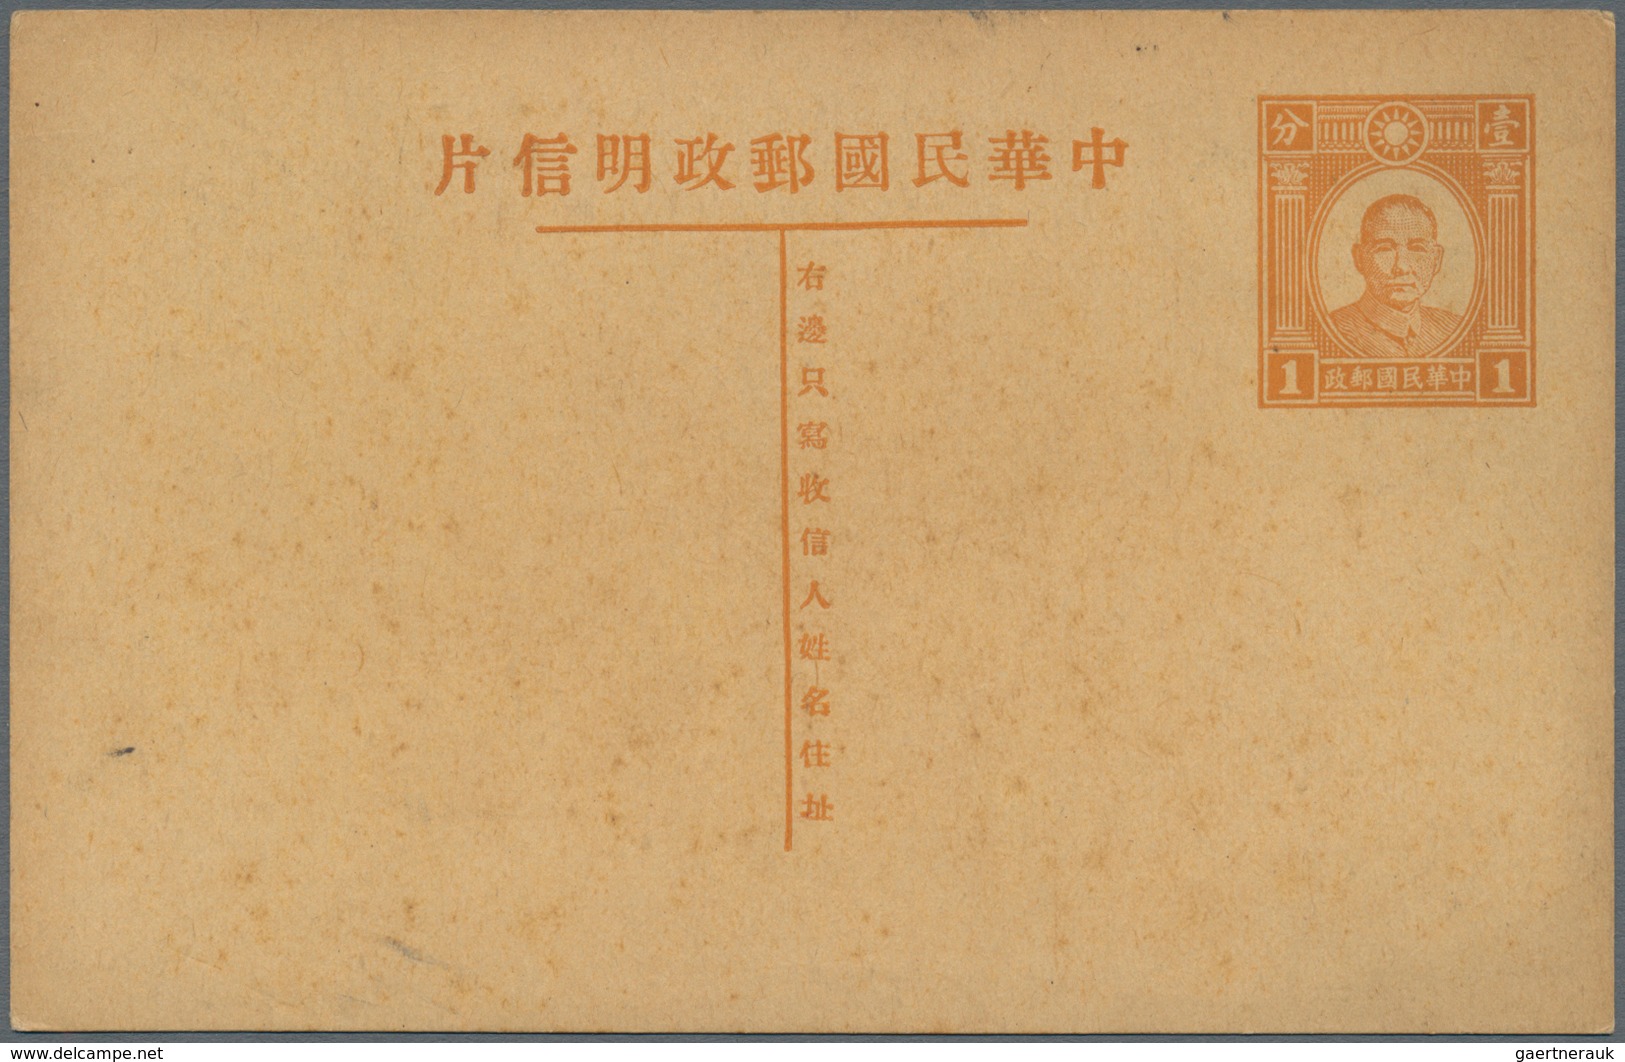 China - Ganzsachen: 1915/36, used stationery cards junk (6 inc. two uprated) or SYS (3, one mint), t